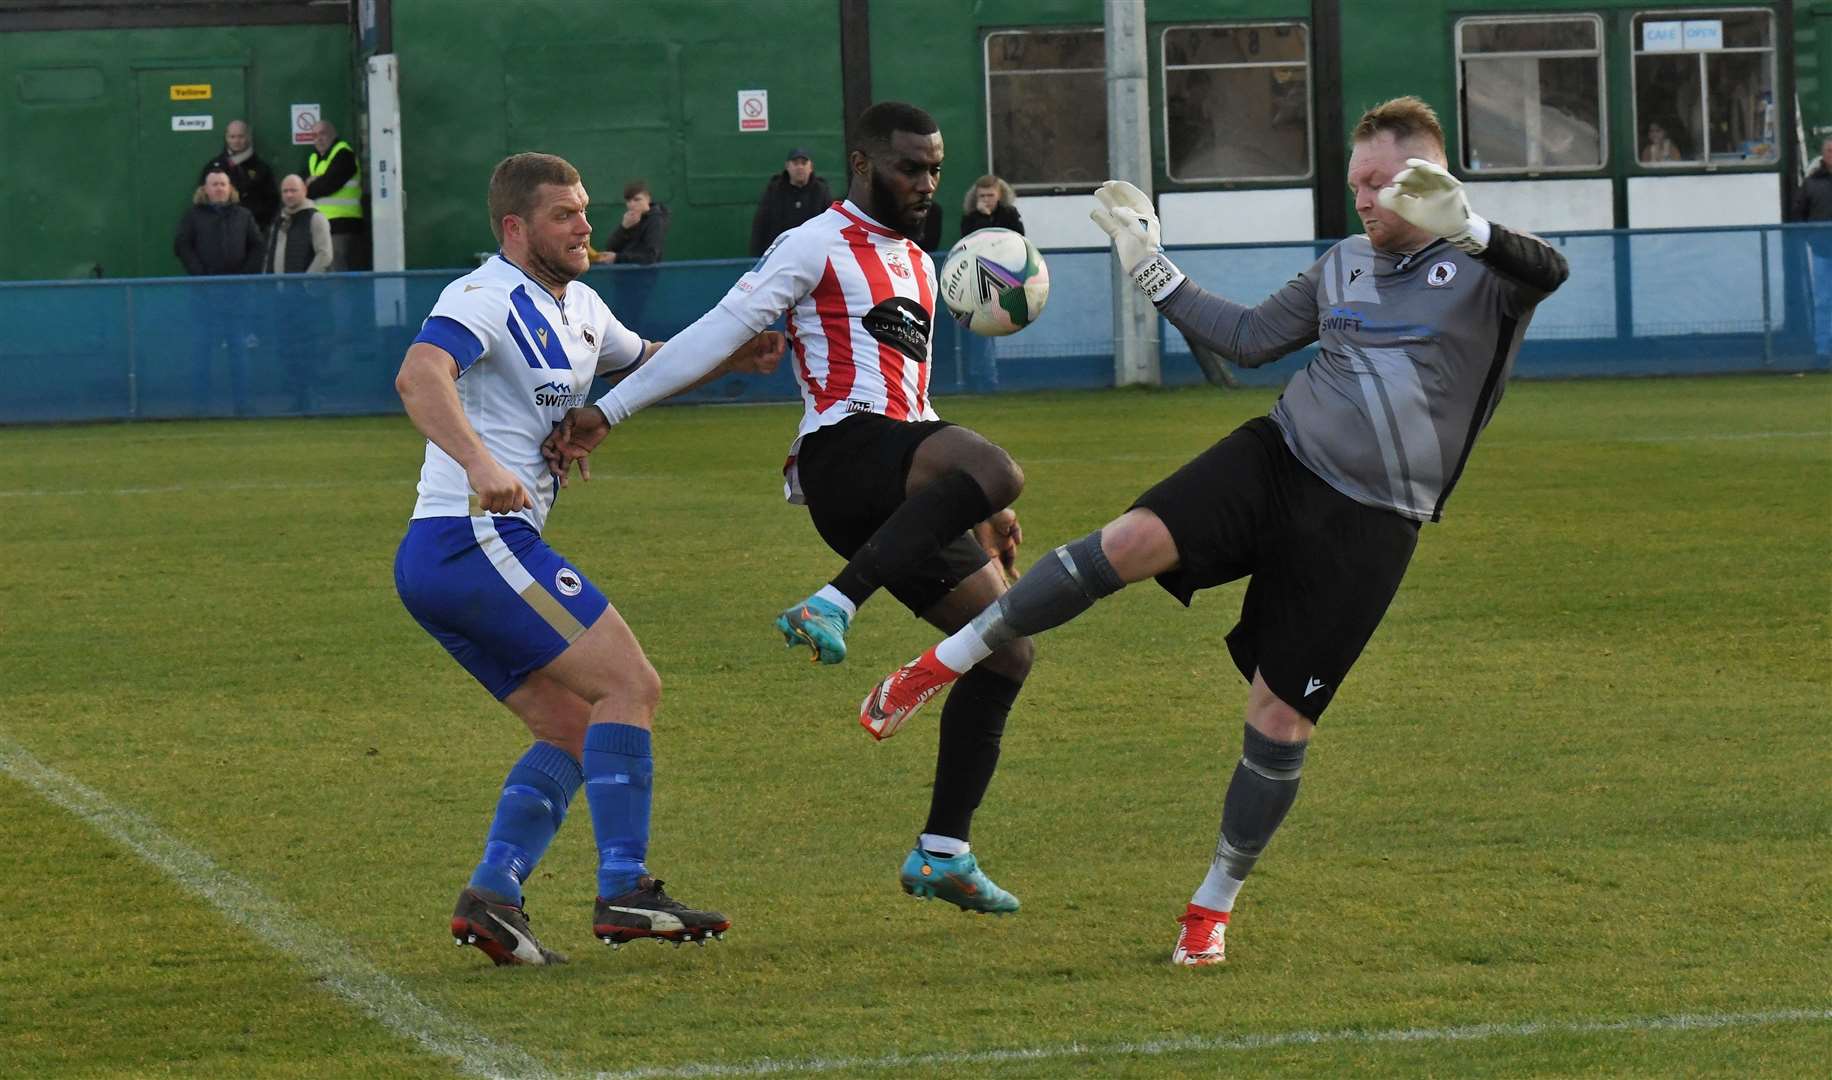 Sheppey United on the attack Picture: Marc Richards